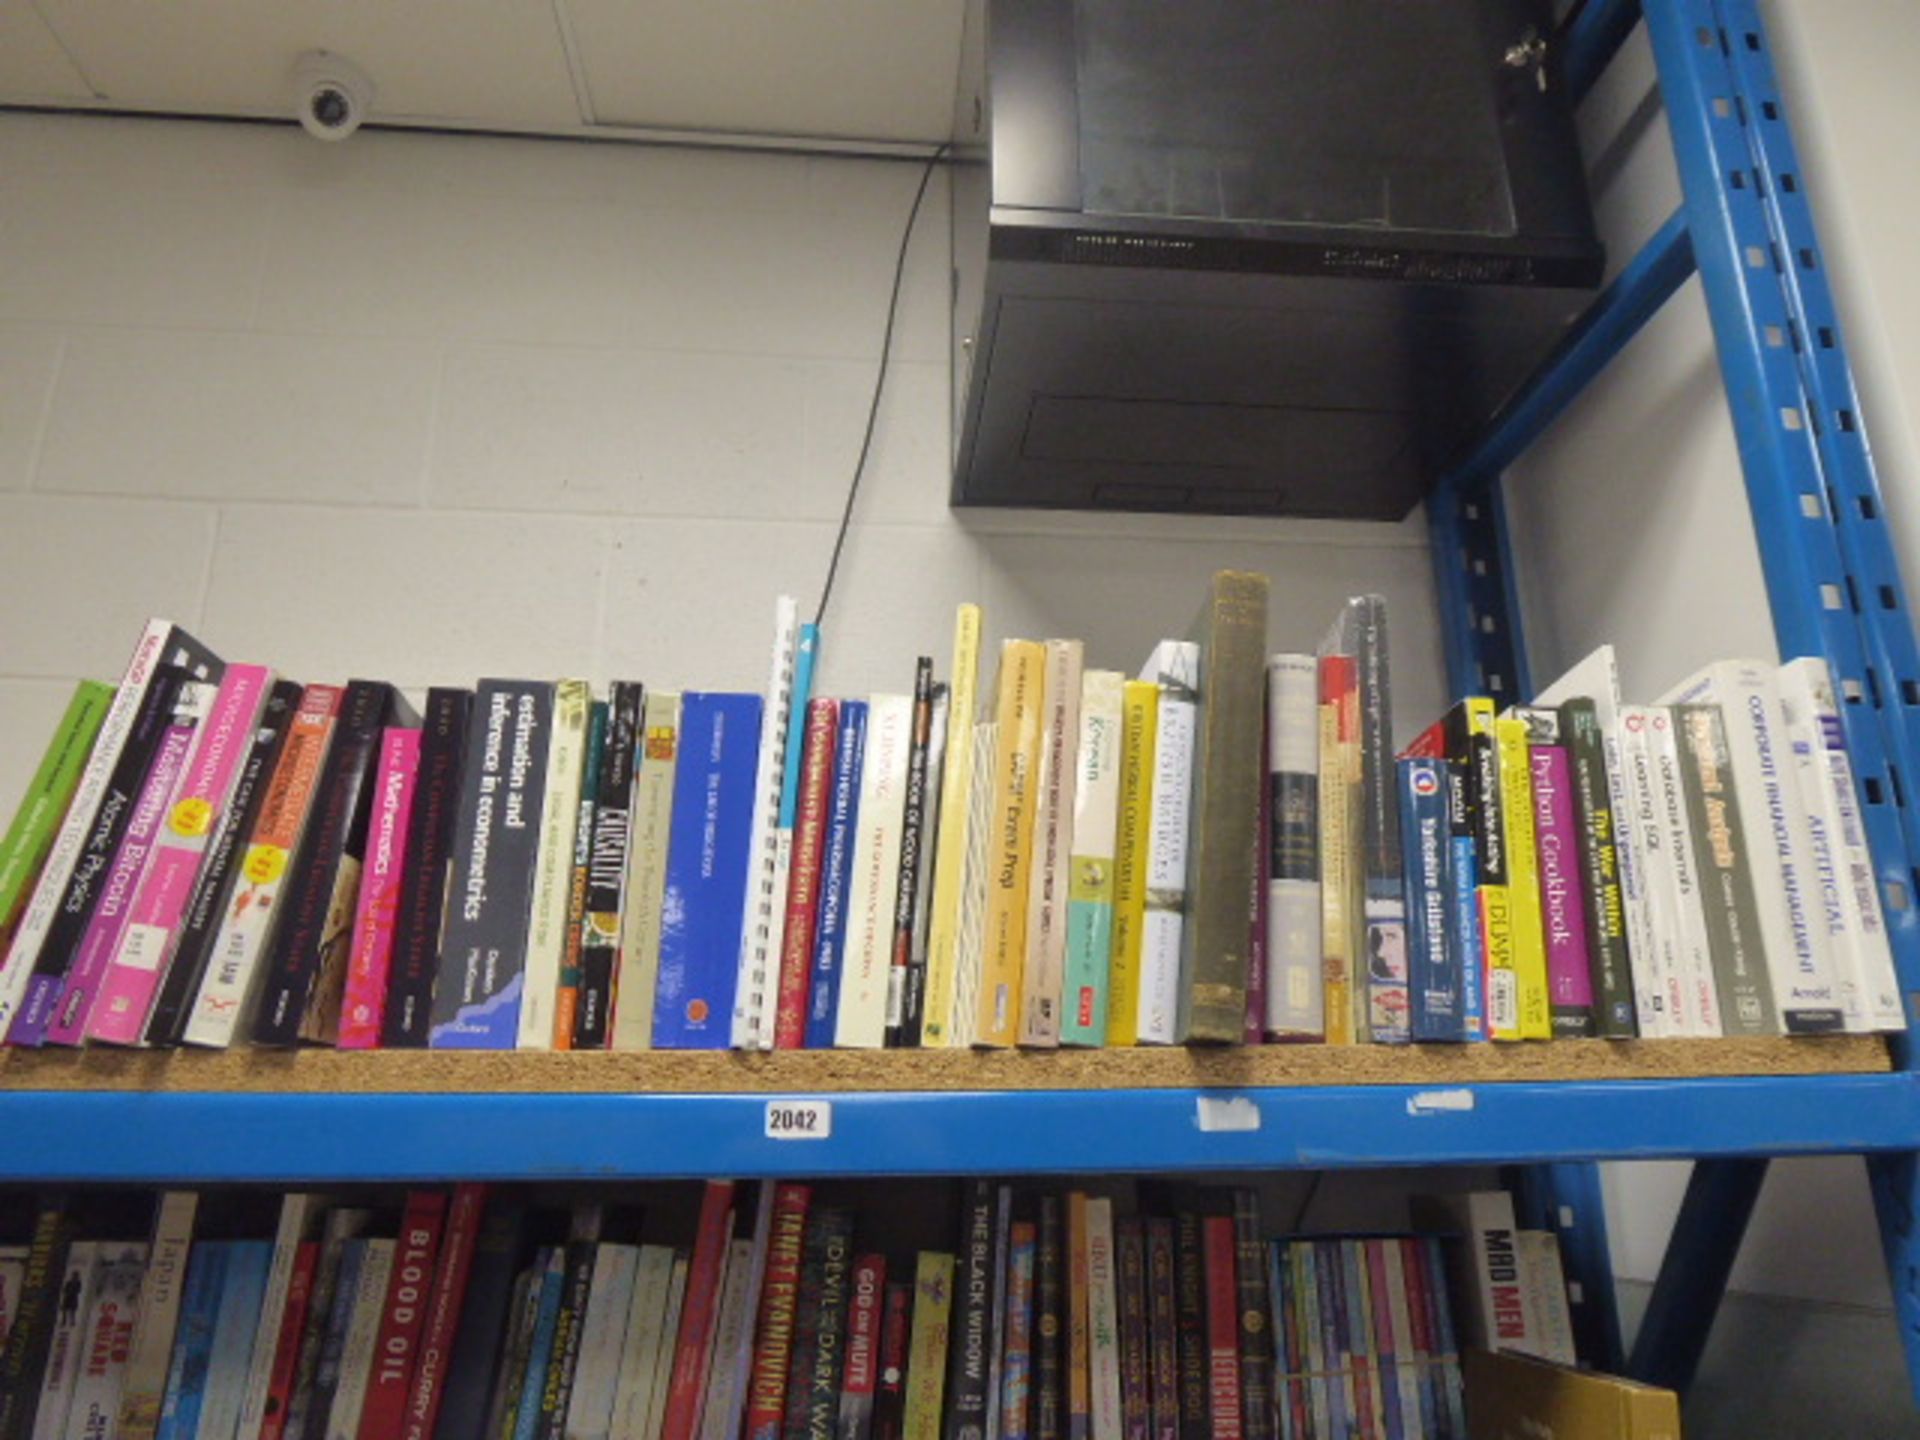 Shelf of reference and other study books.